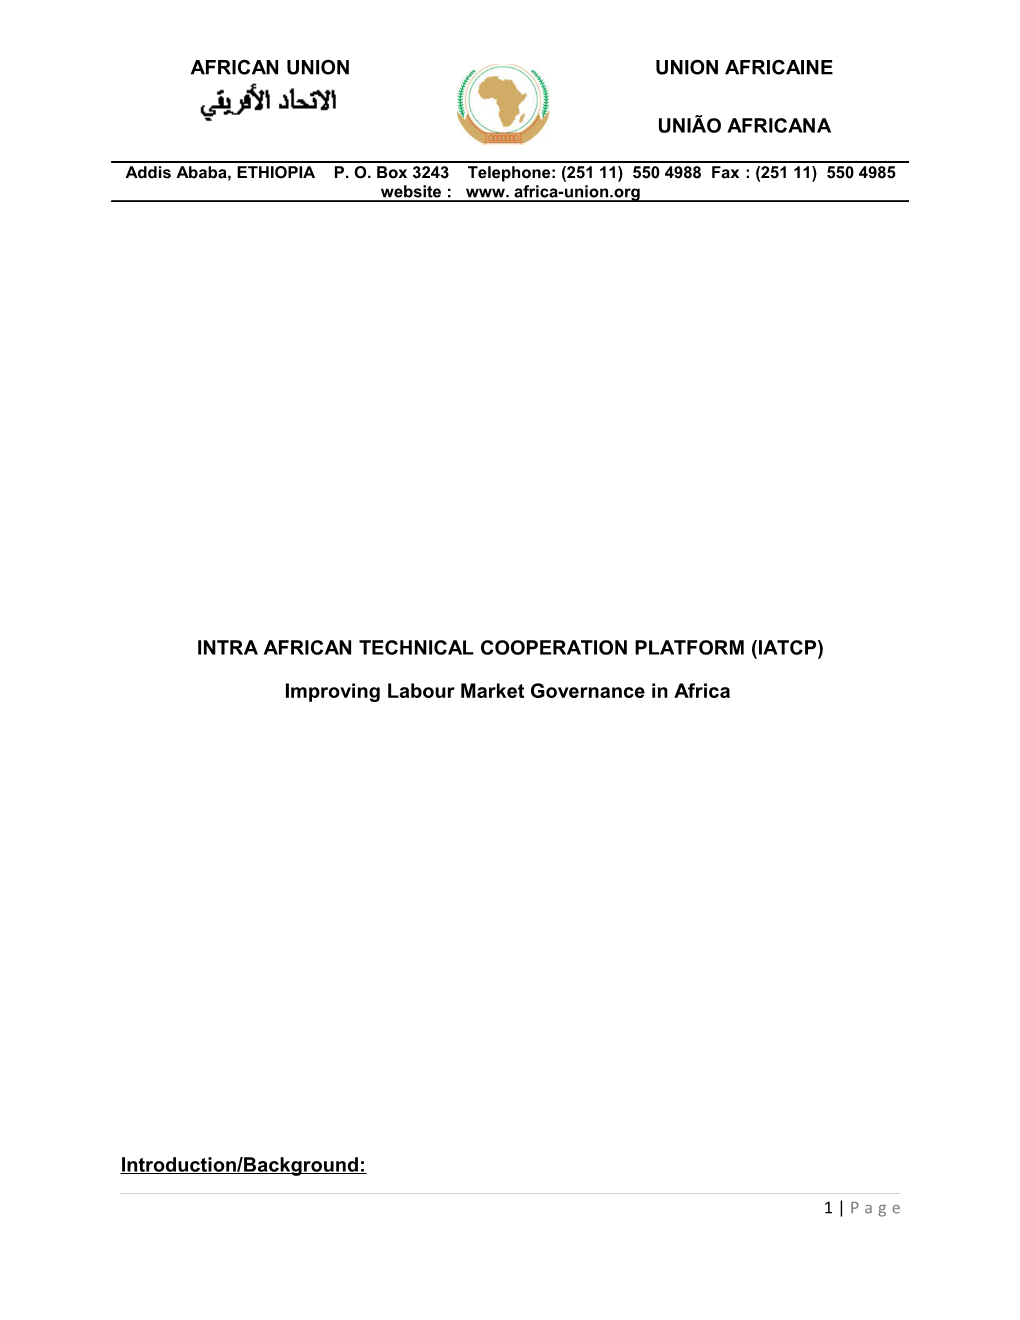 Intra African Technical Cooperation Platform (Iatcp)